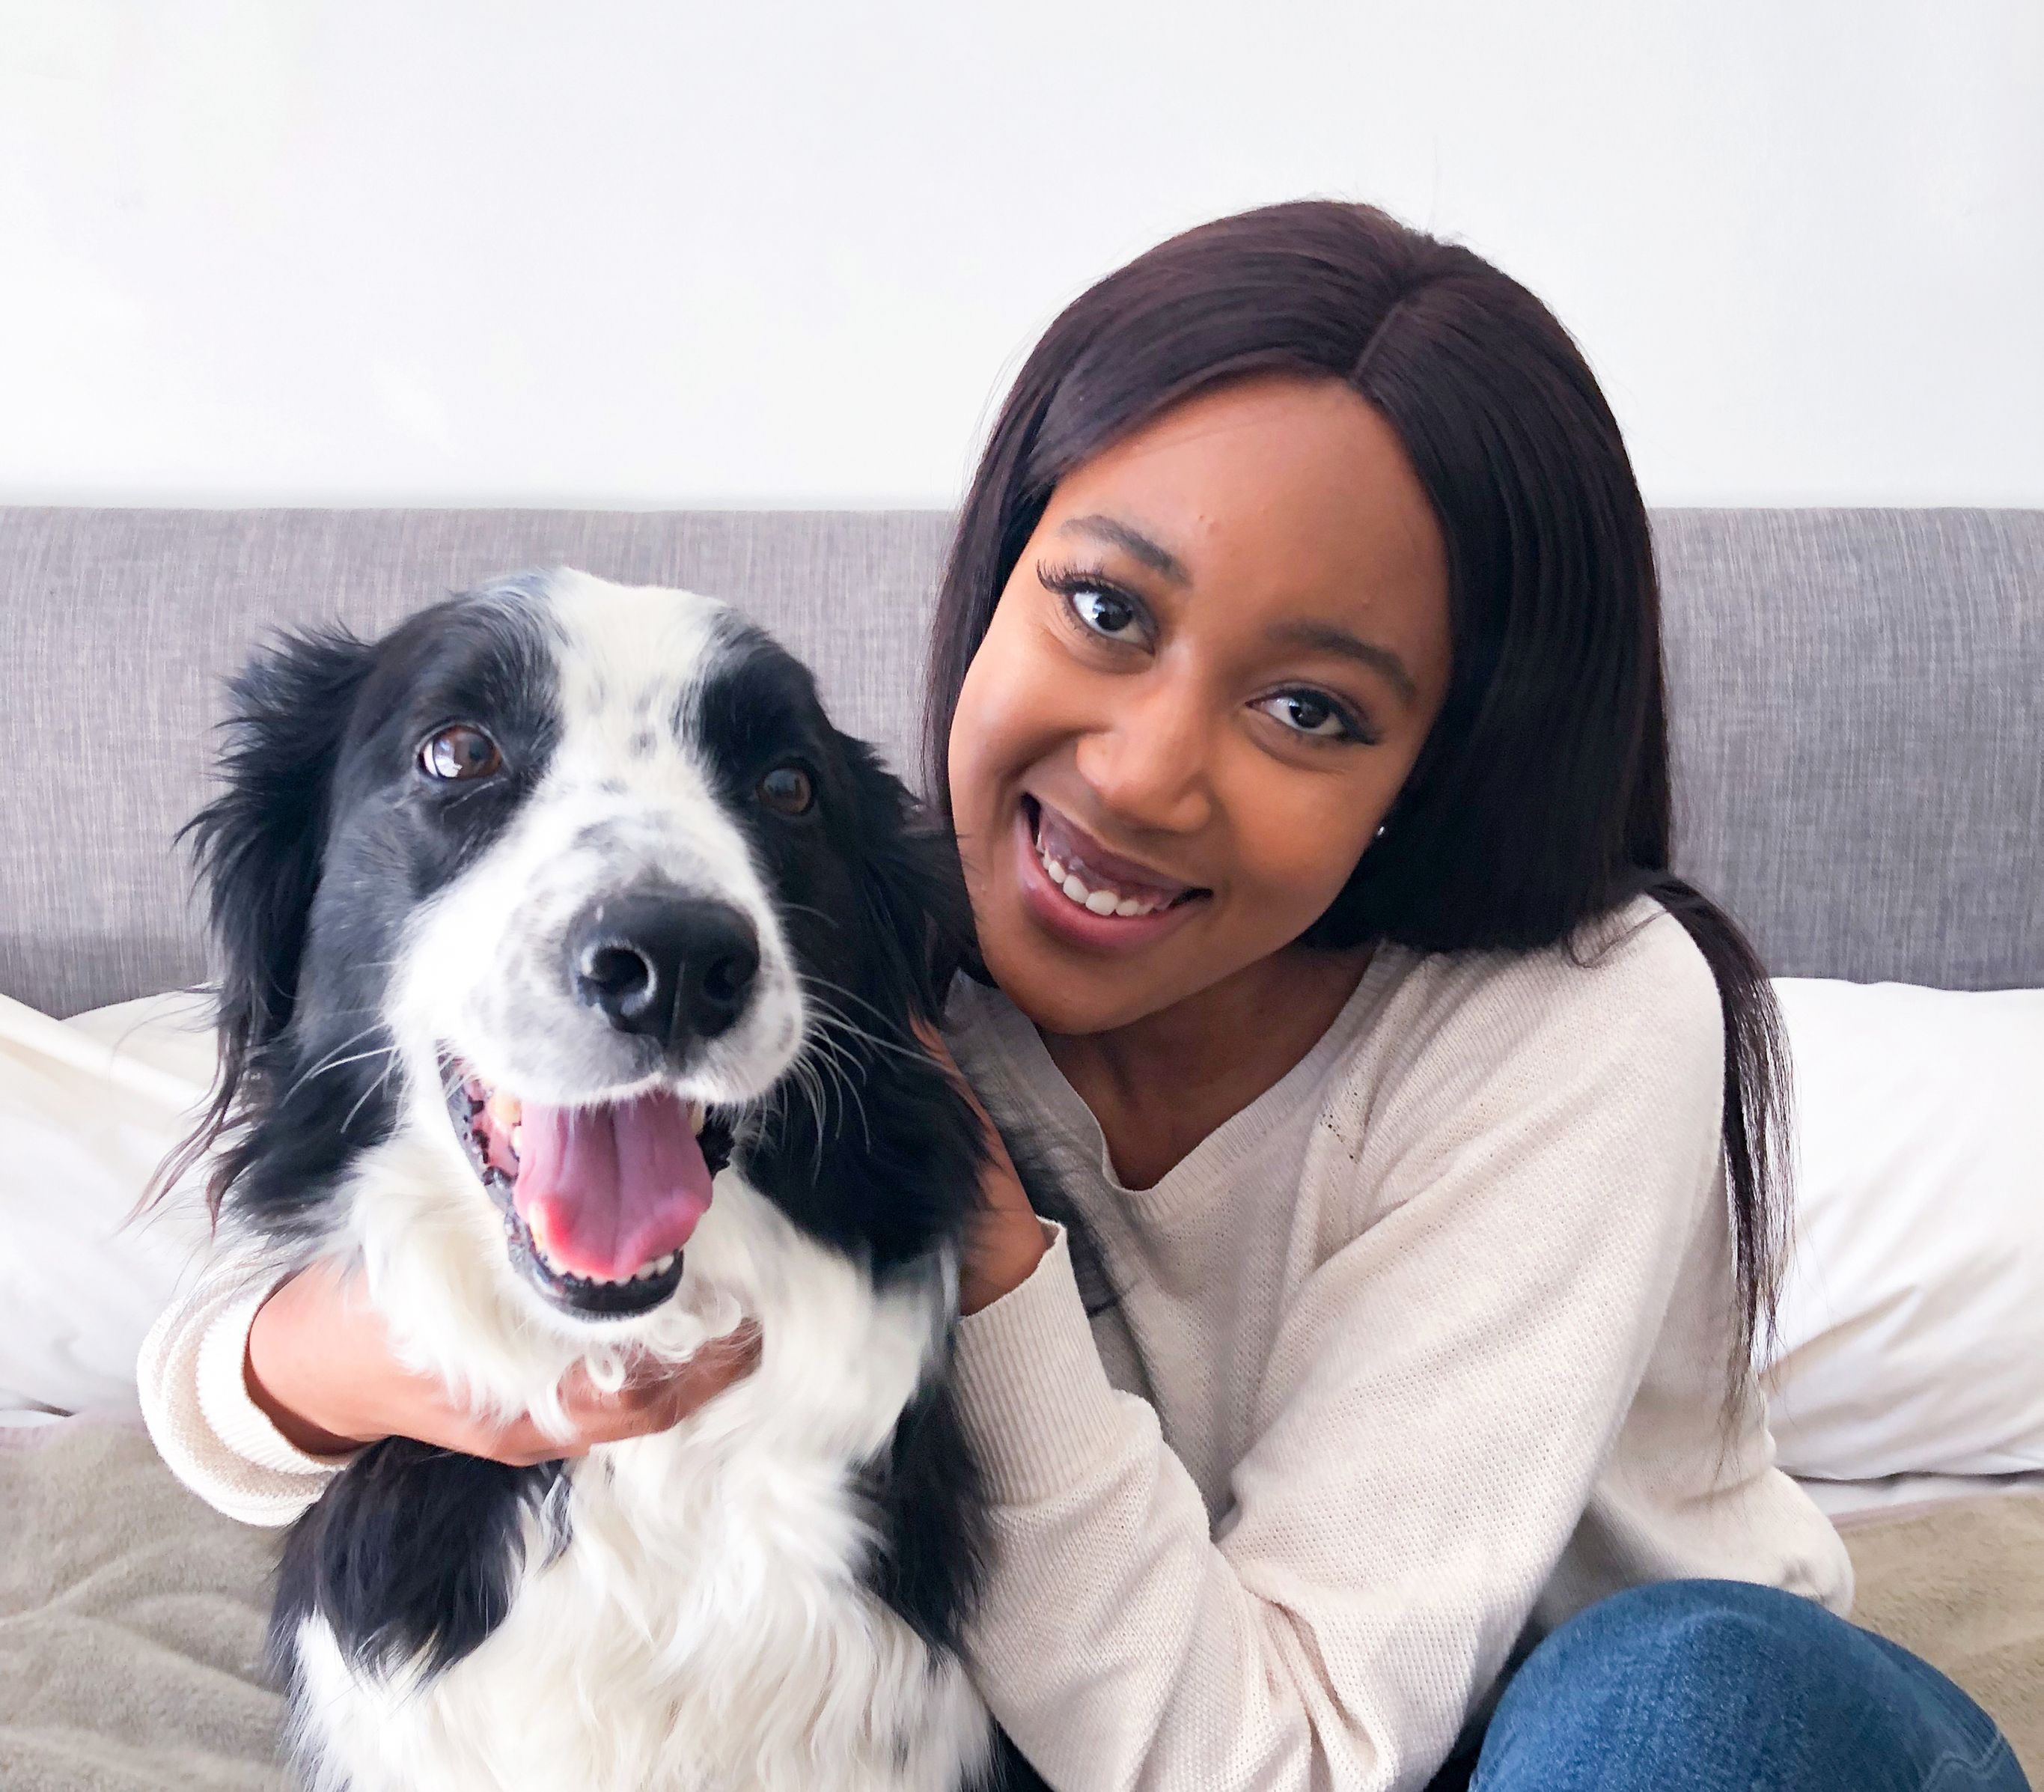 A woman smiling with a dog that has black and white fur.